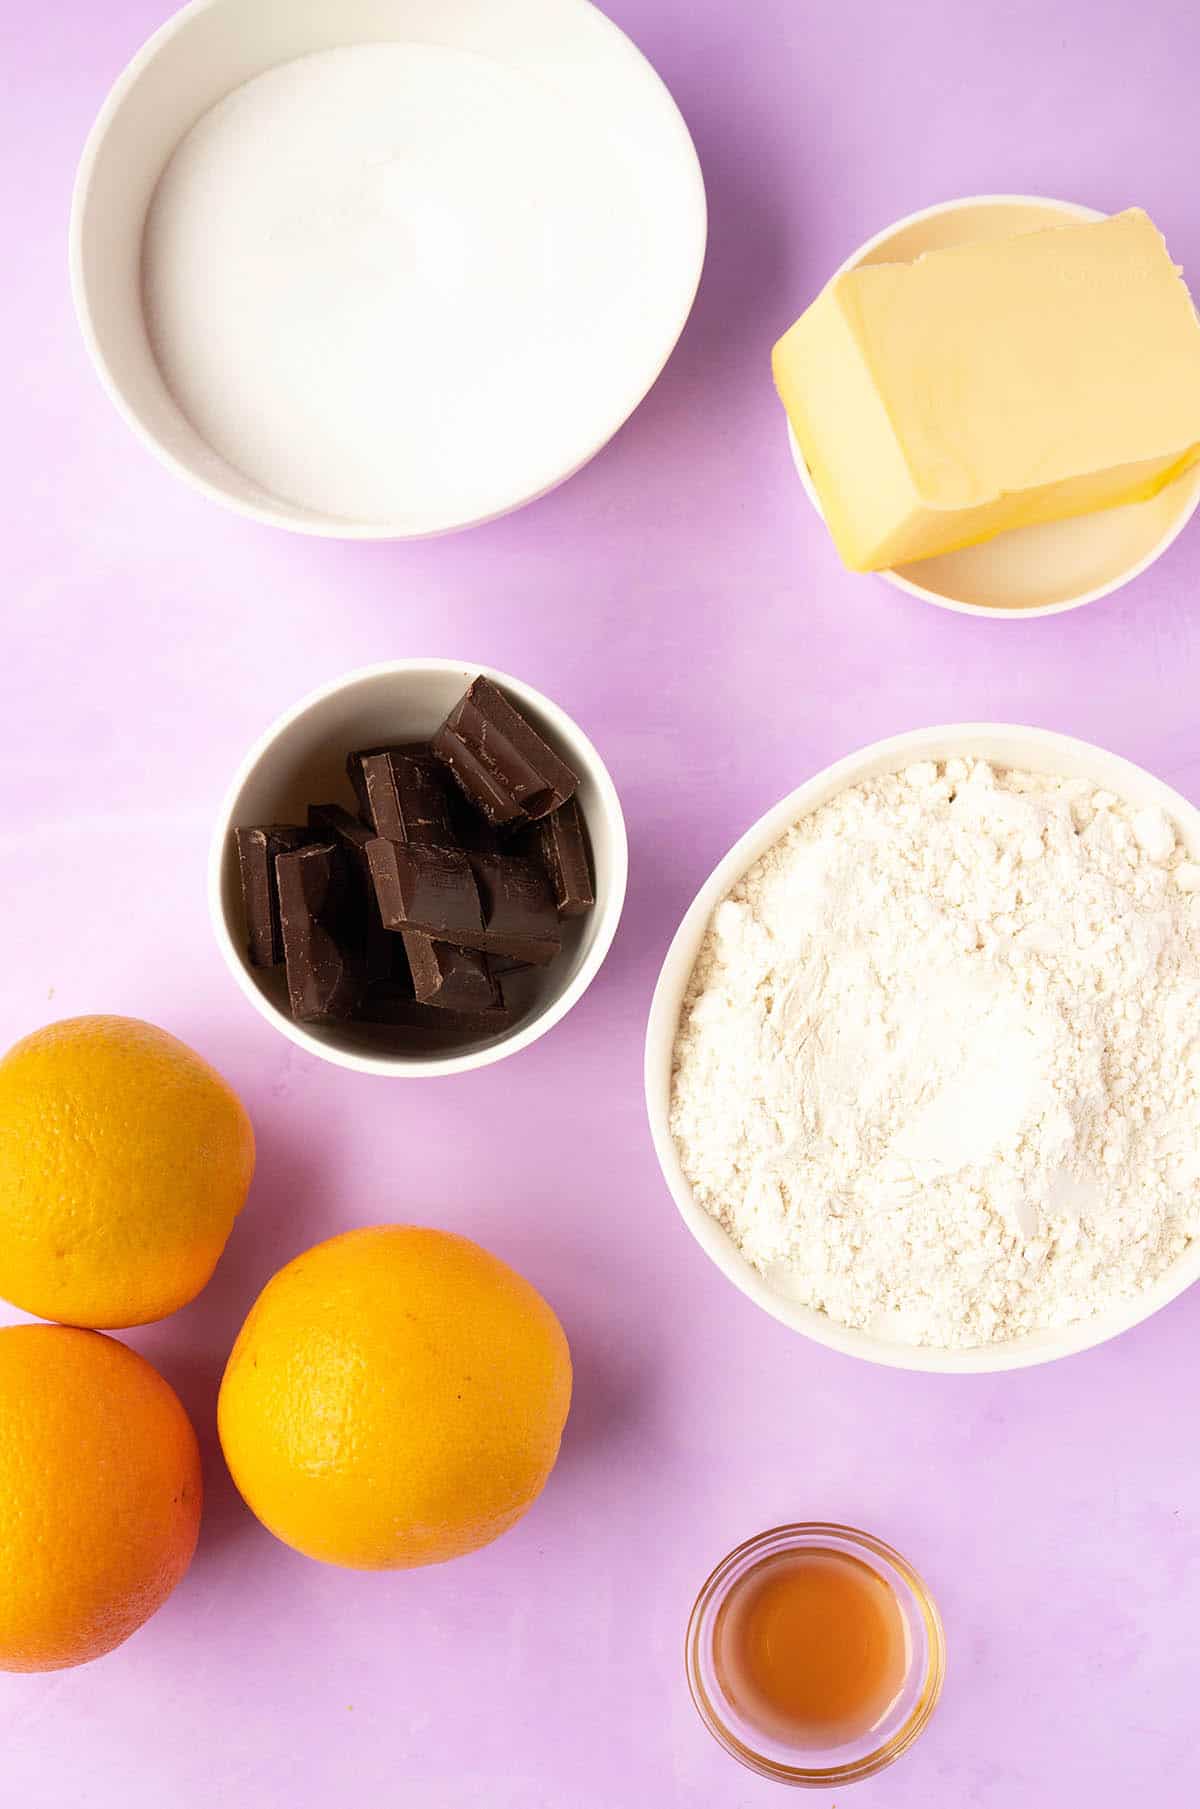 All the ingredients needed to make Orange Cookies from scratch on a purple background.